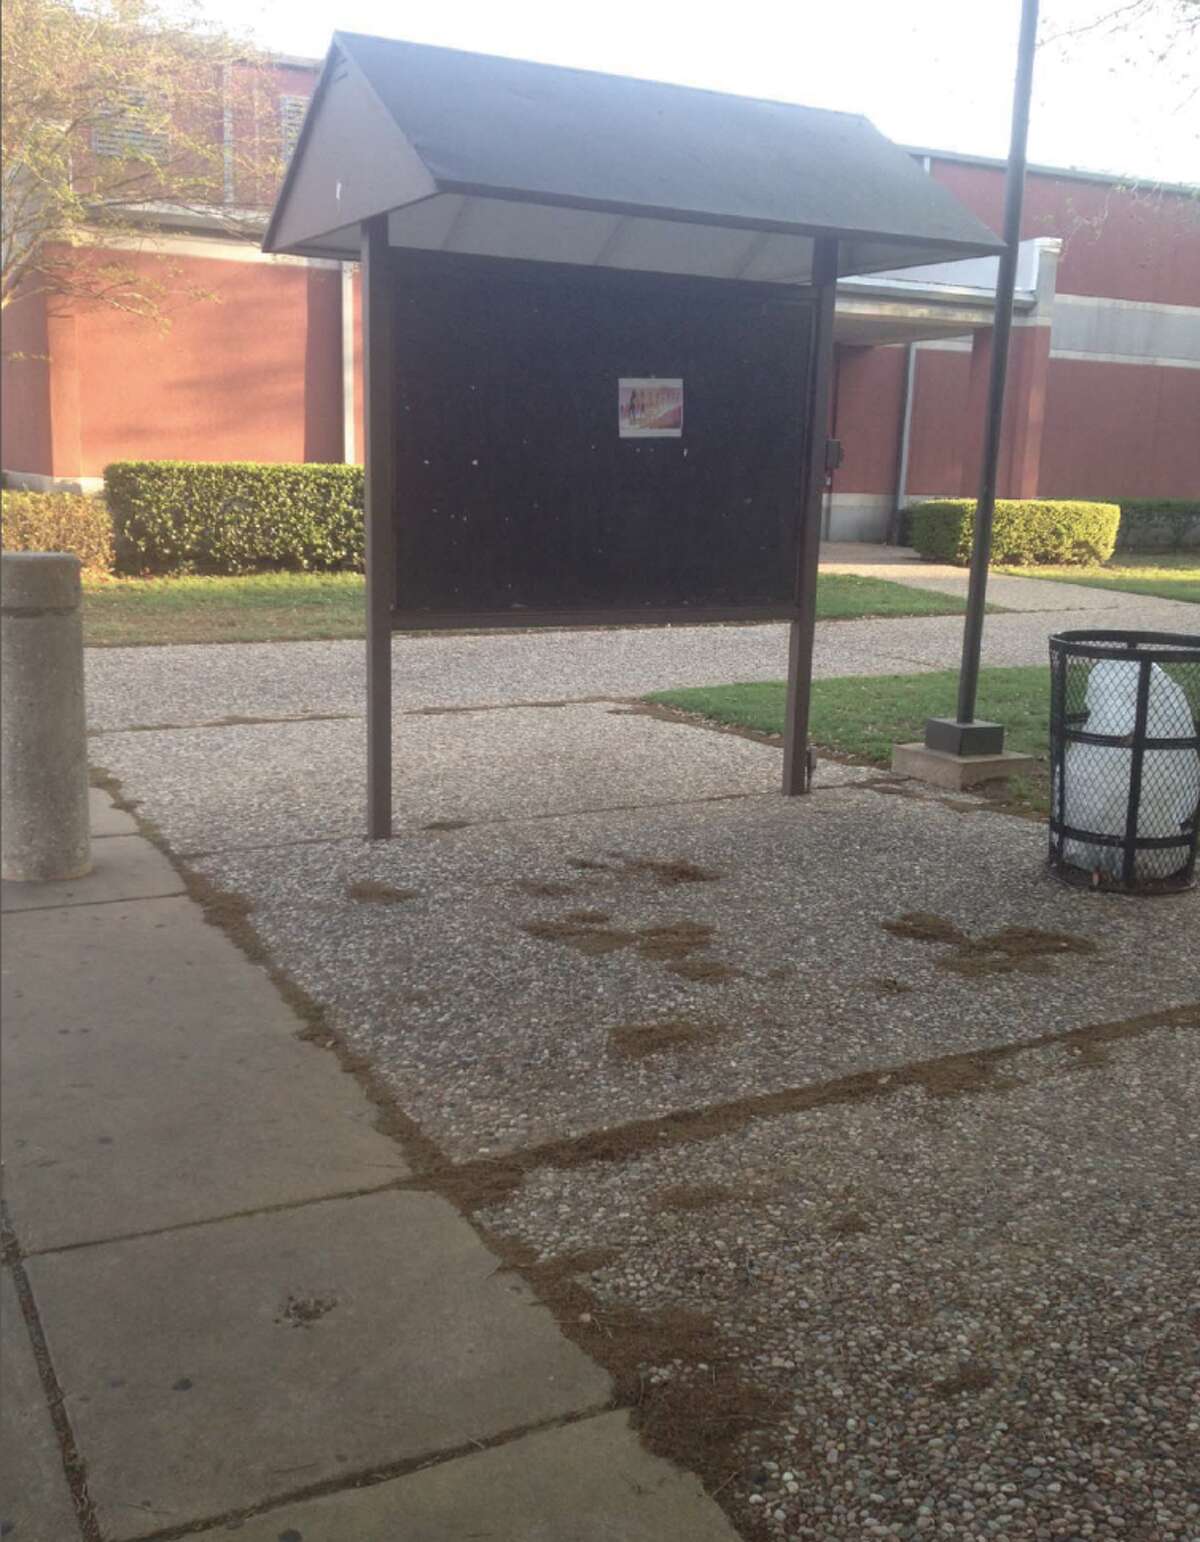 Blinn College's free speech zone is a 190-square-foot concrete corner divided by a bulletin board, a lawsuit filed Wednesday alleges.